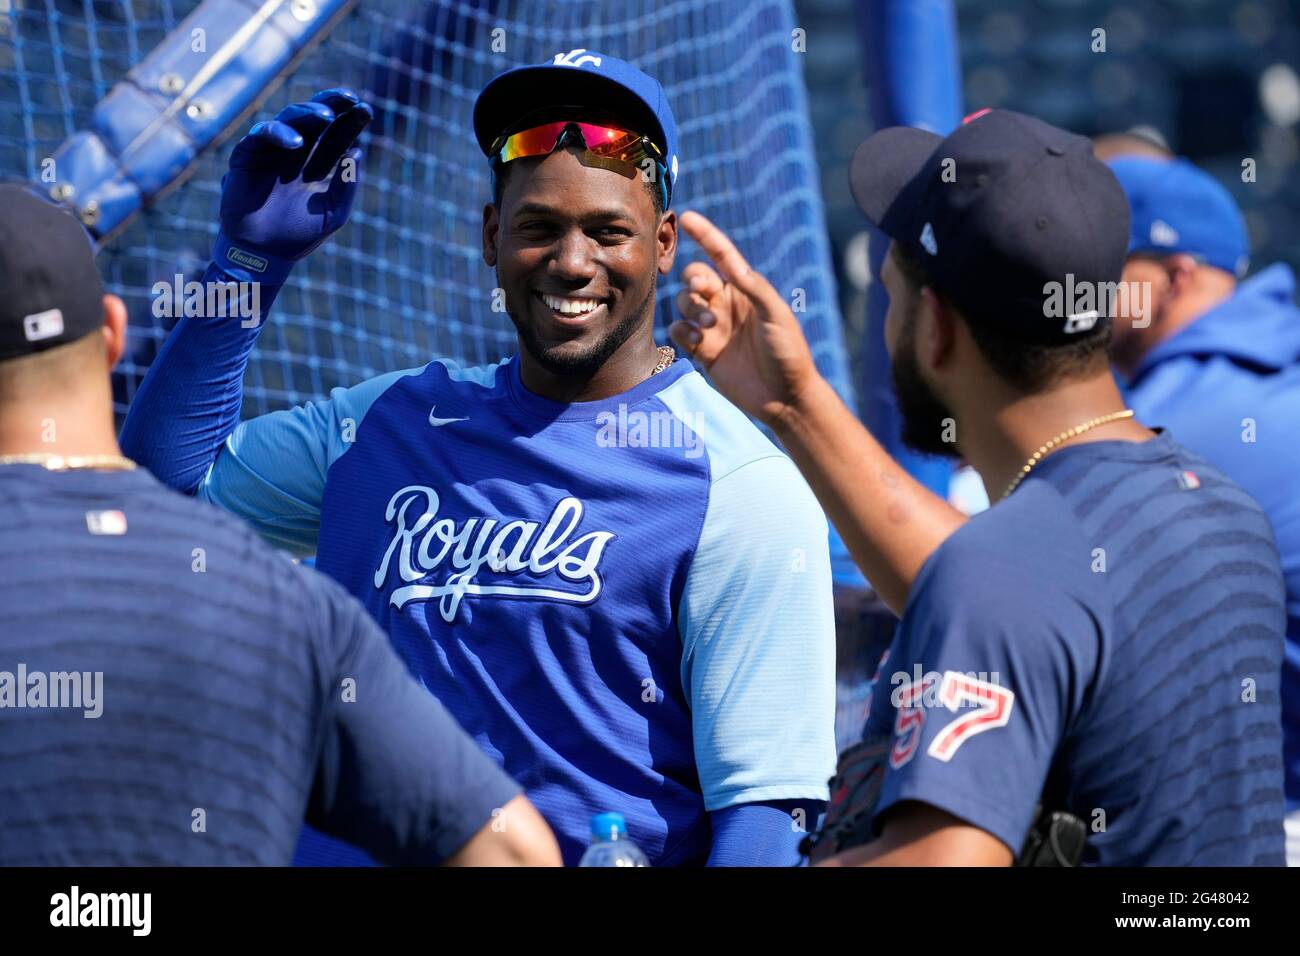 Kansas City, MO, USA. 18th June, 2021. Kansas City Royals Jorge Soler (12)  relaxes with a few Boston Red Sox players during pre-game batting practice  at Kauffman Stadium in Kansas City, MO.